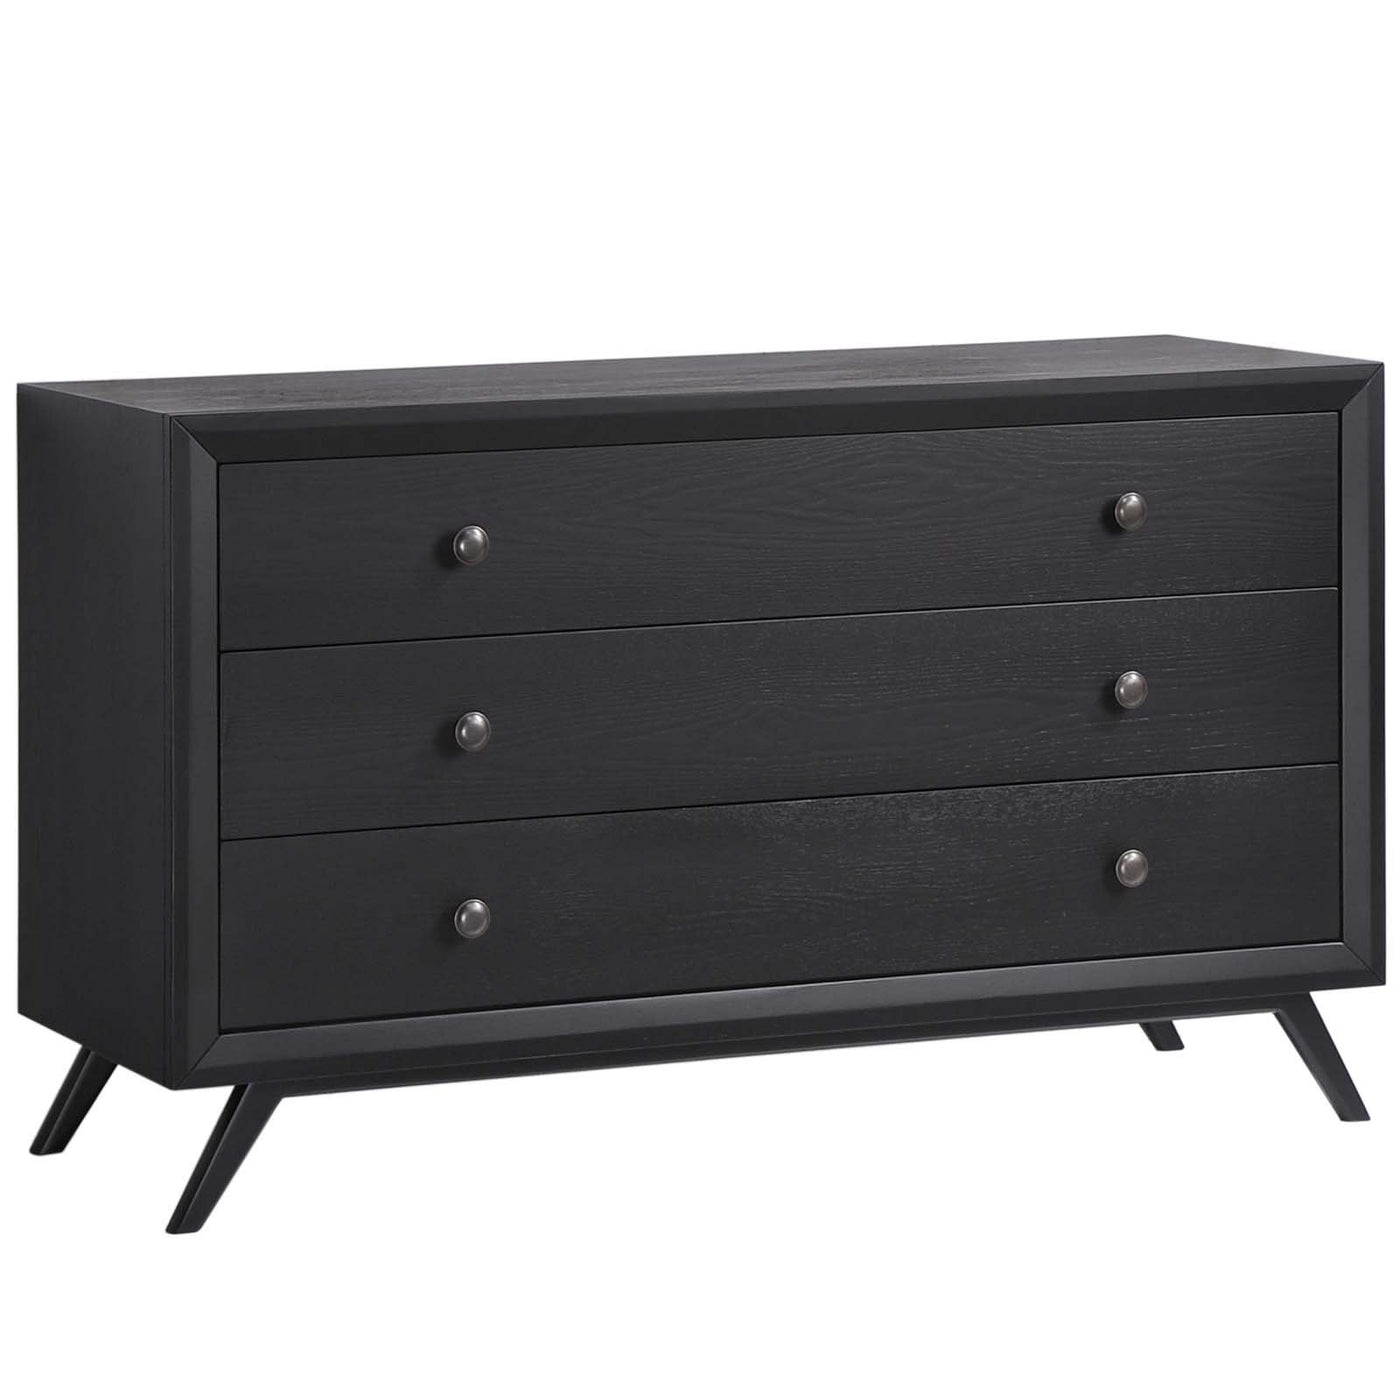 Nationwide Dressers & Chests